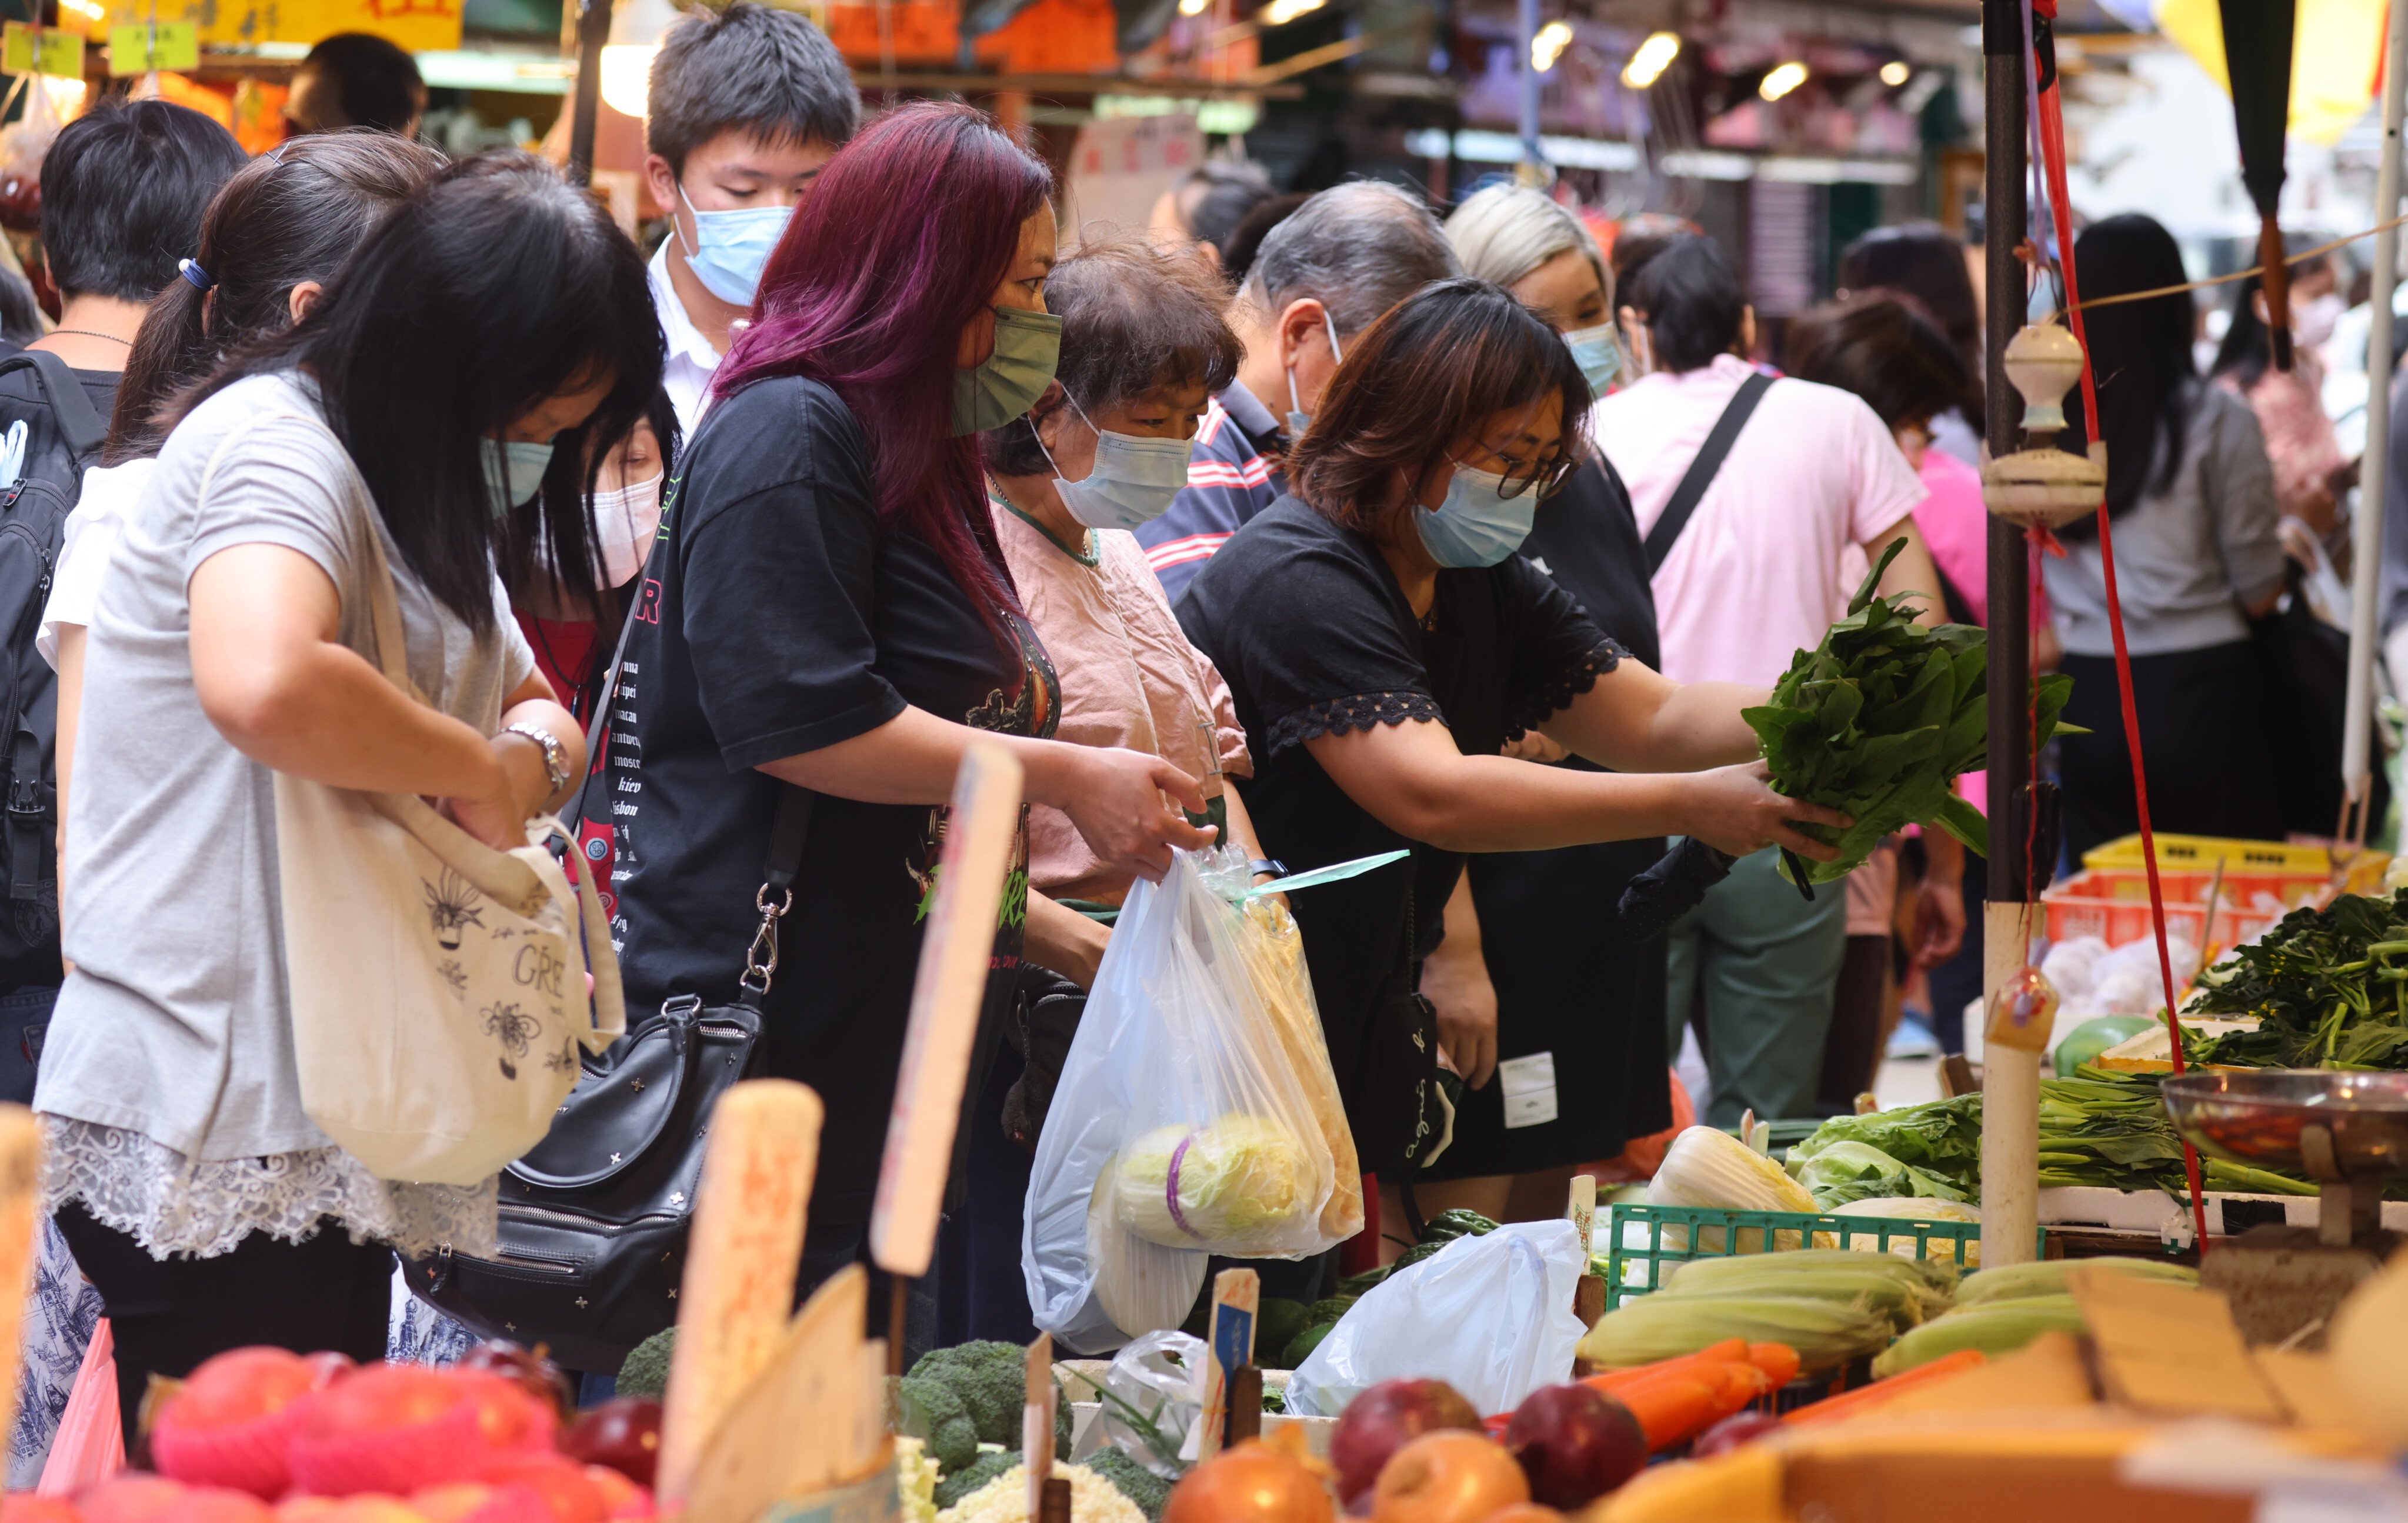 People rush to buy food at a market in Mong Kok as Tropical Storm Kompasu nears Hong Kong on October 12. CEOs in Asia fear that rising prices could dampen consumer sentiment. Photo: Dickson Lee